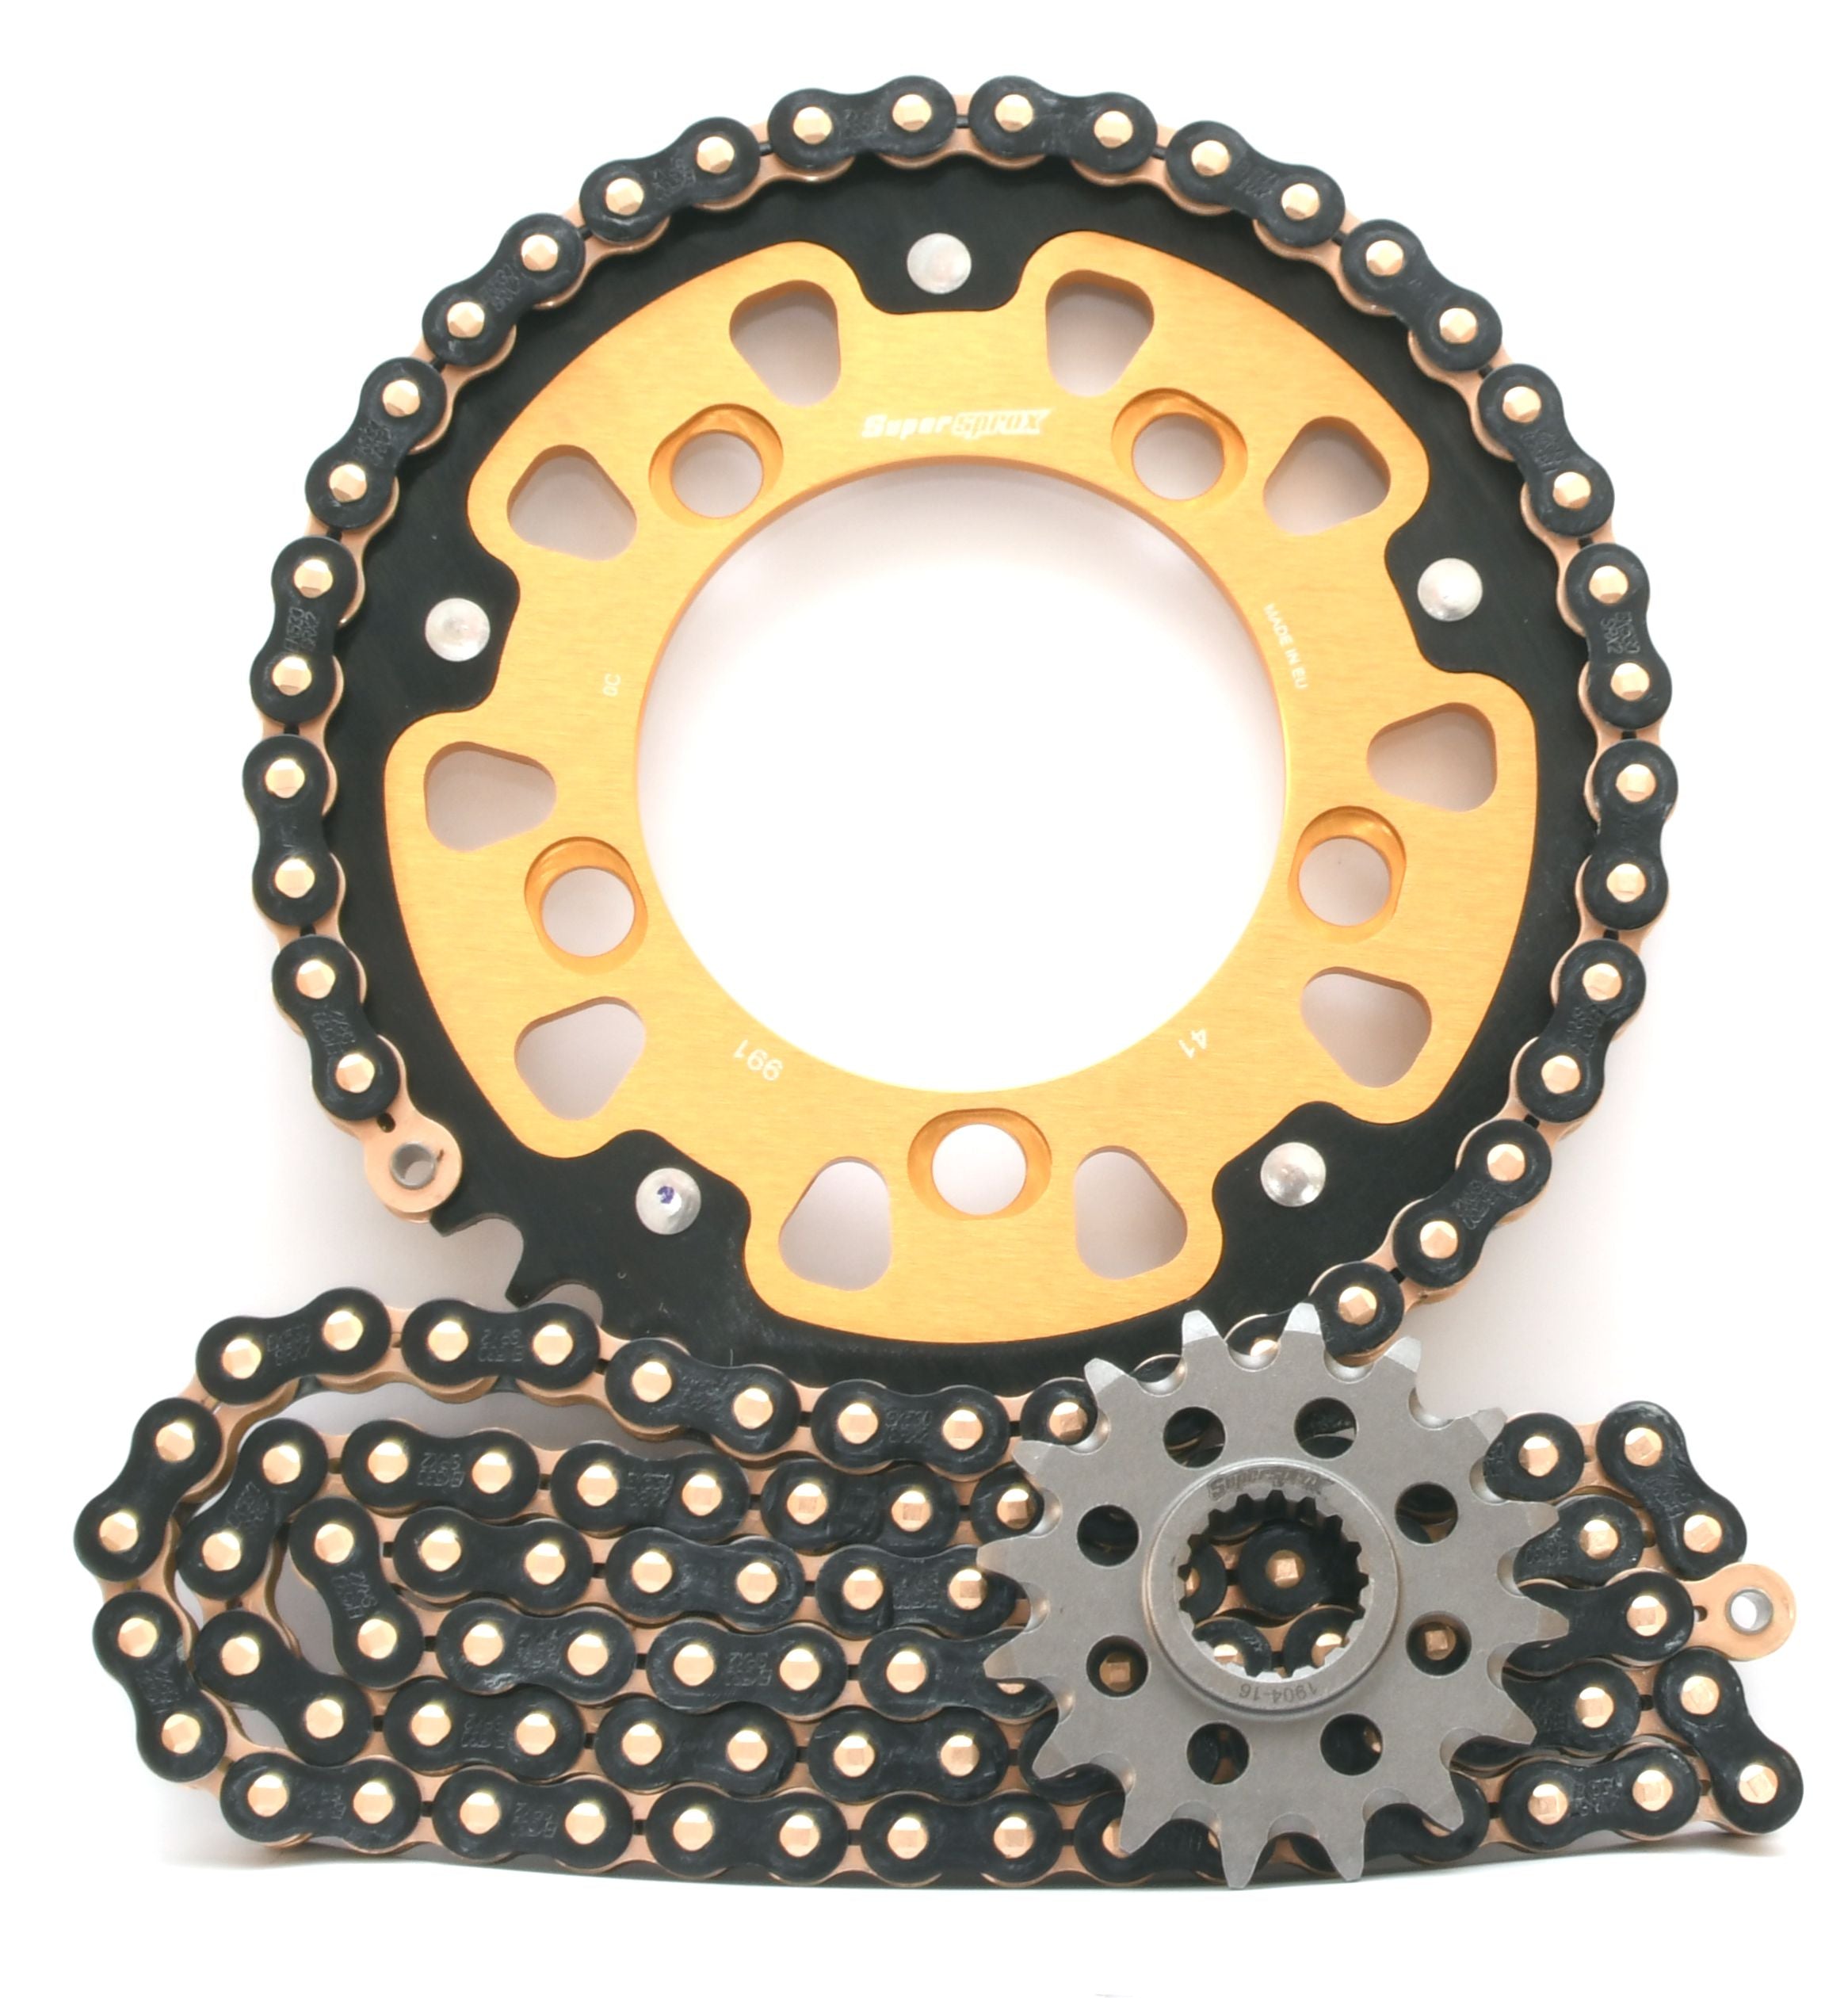 Supersprox Chain & Sprocket Kit for KTM 950/990 Supermoto (Inc R/T) 05-13 - Standard Gearing